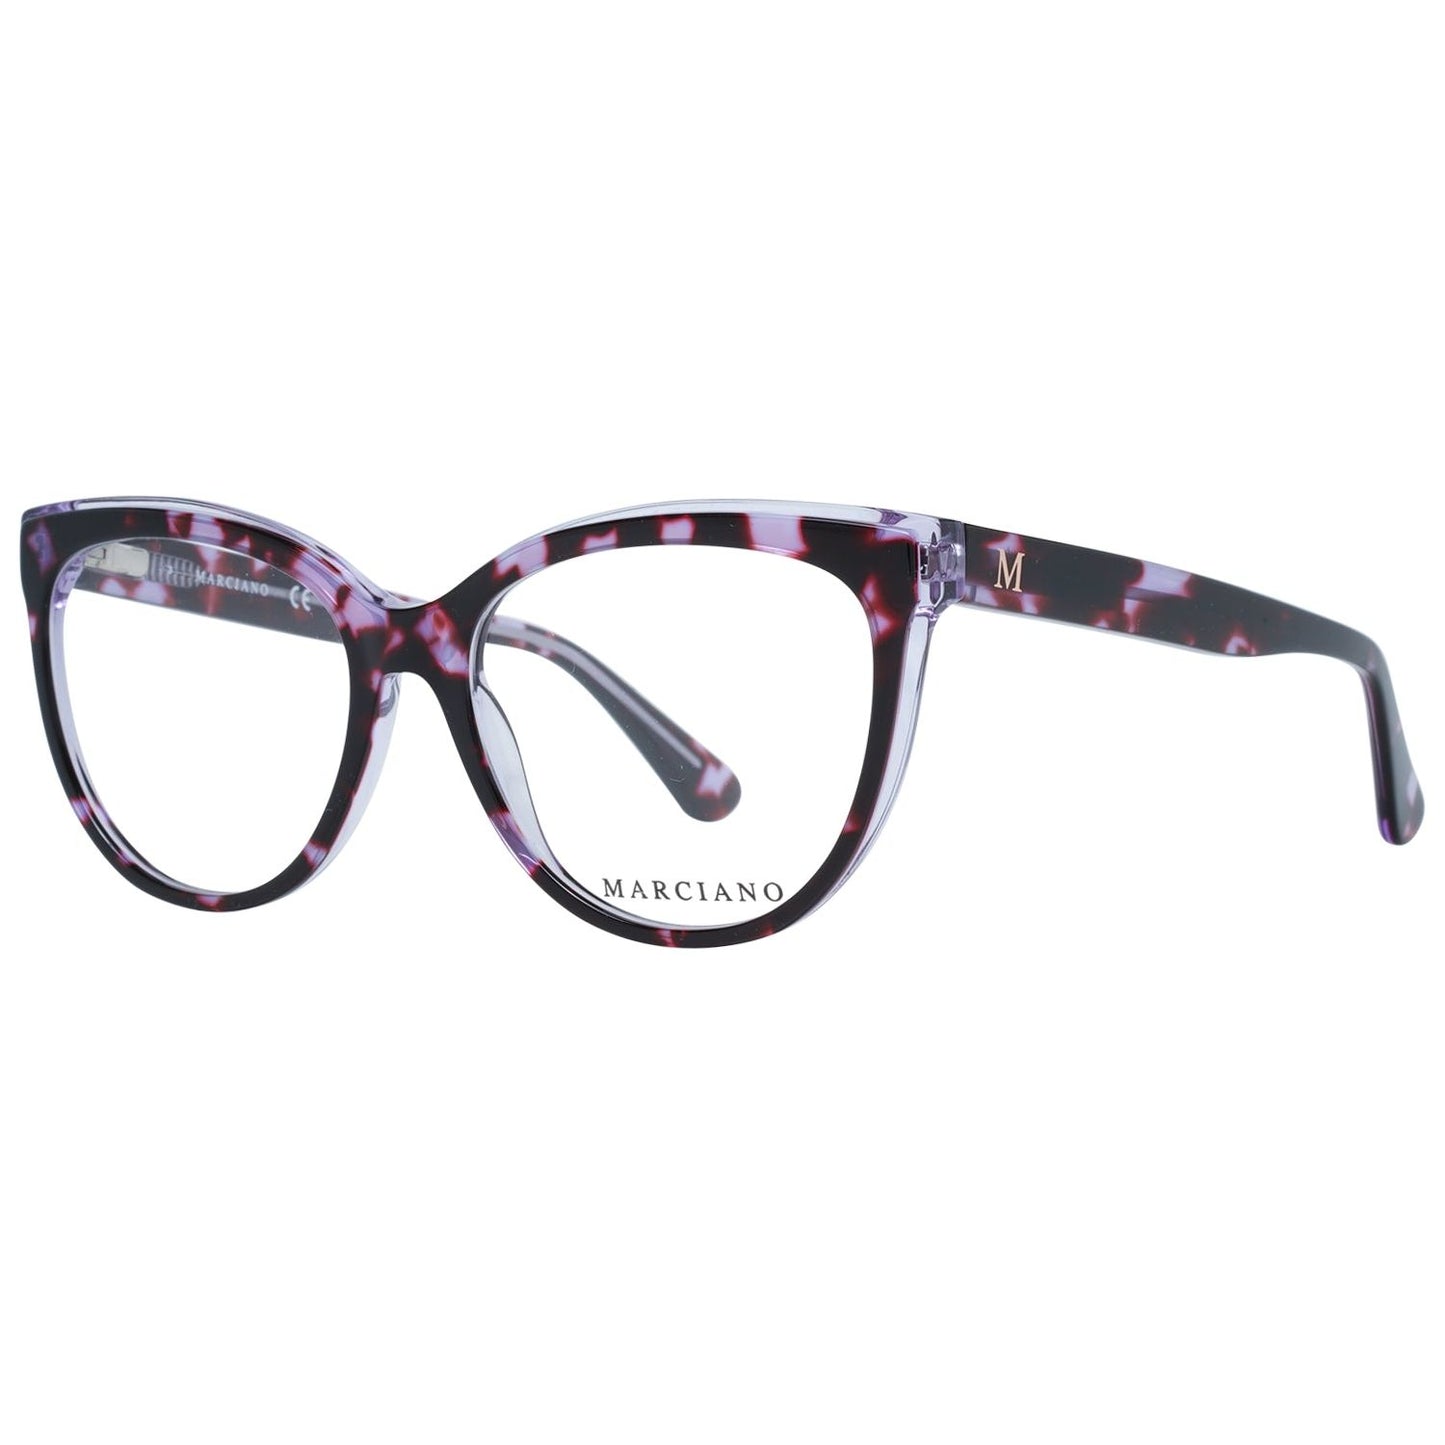 MARCIANO By GUESS EYEWEARMARCIANO BY GUESS MOD. GM0377 54083McRichard Designer Brands£106.00